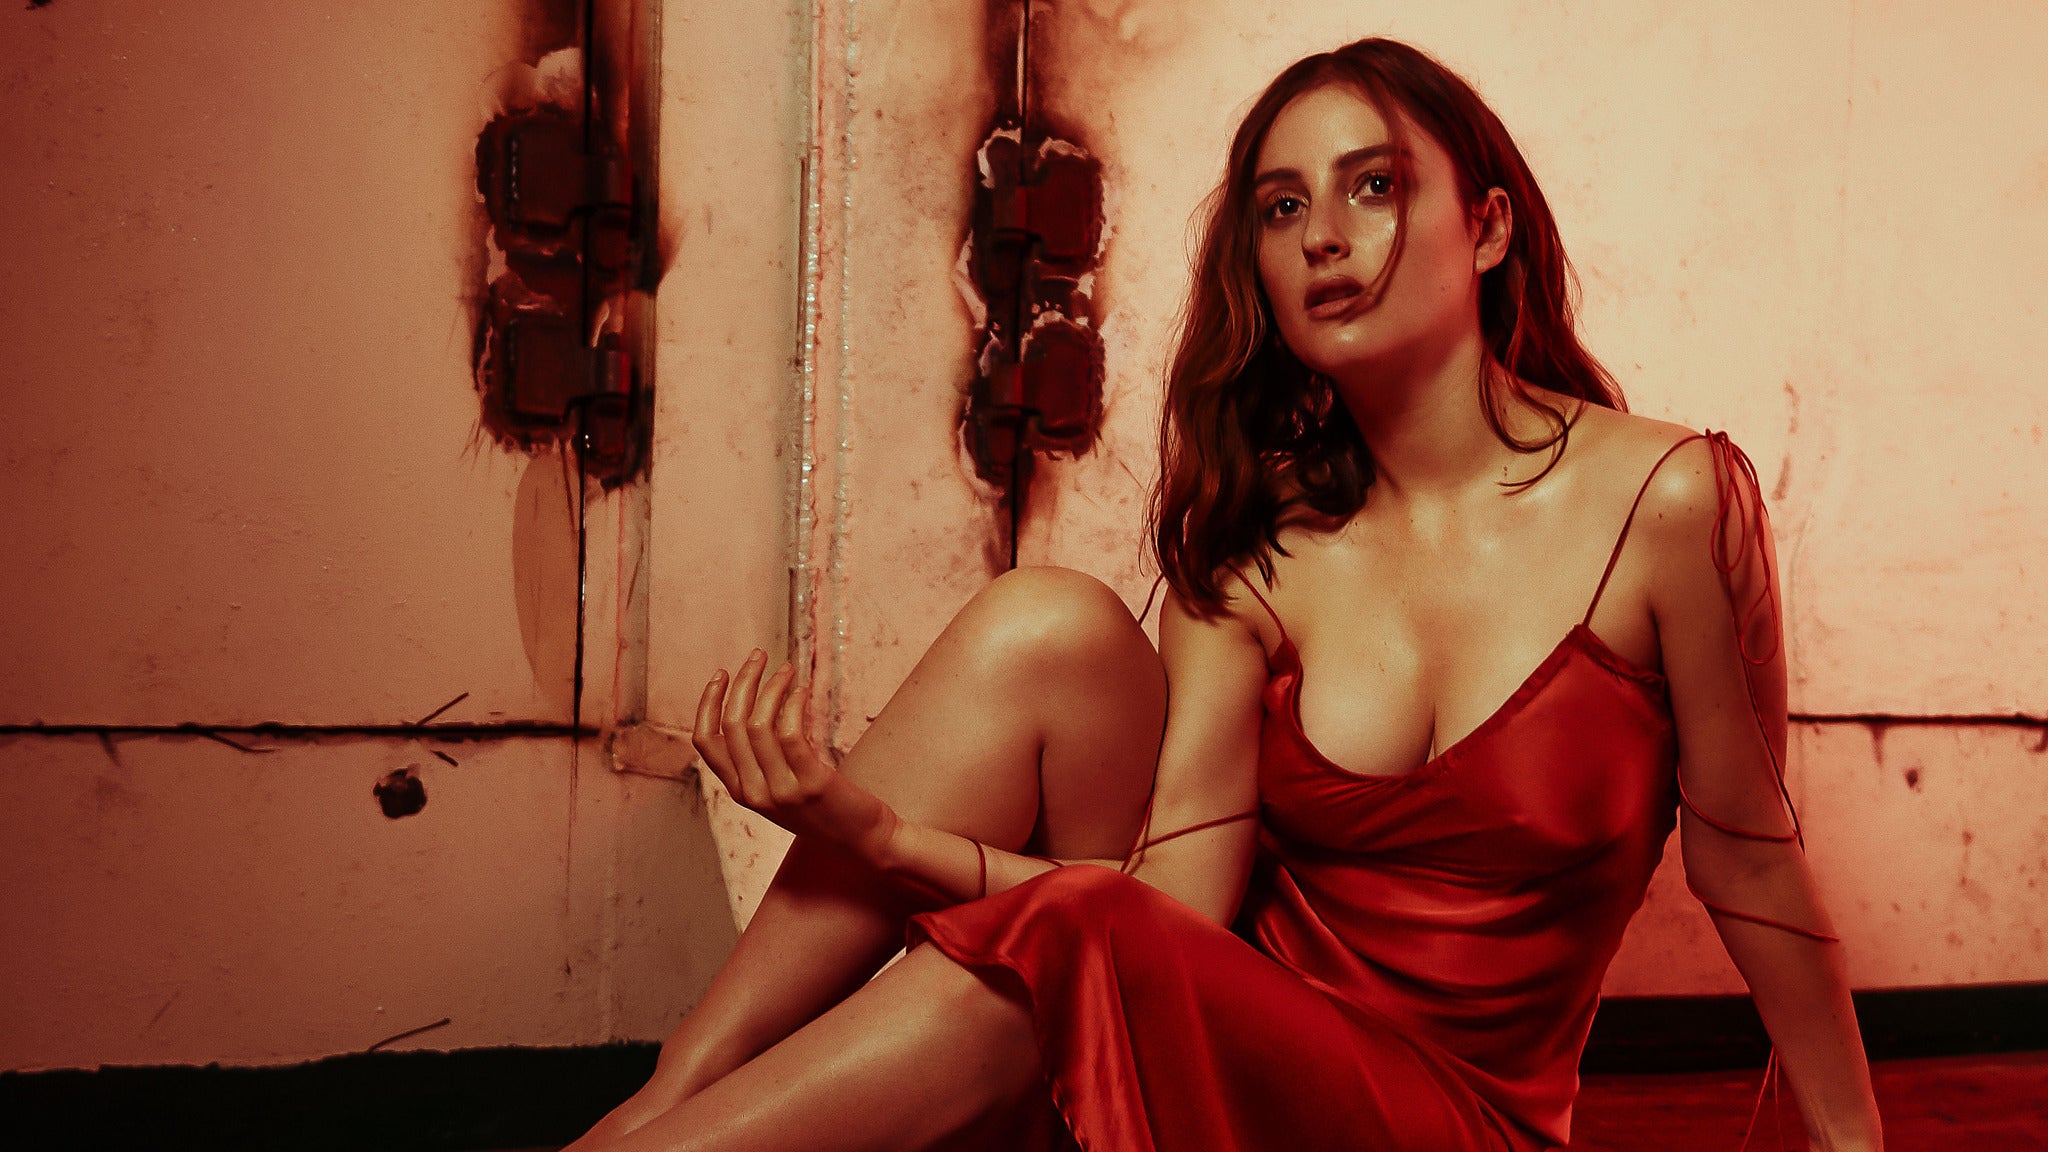 BANKS - The III Tour in Orlando promo photo for VIP Package presale offer code